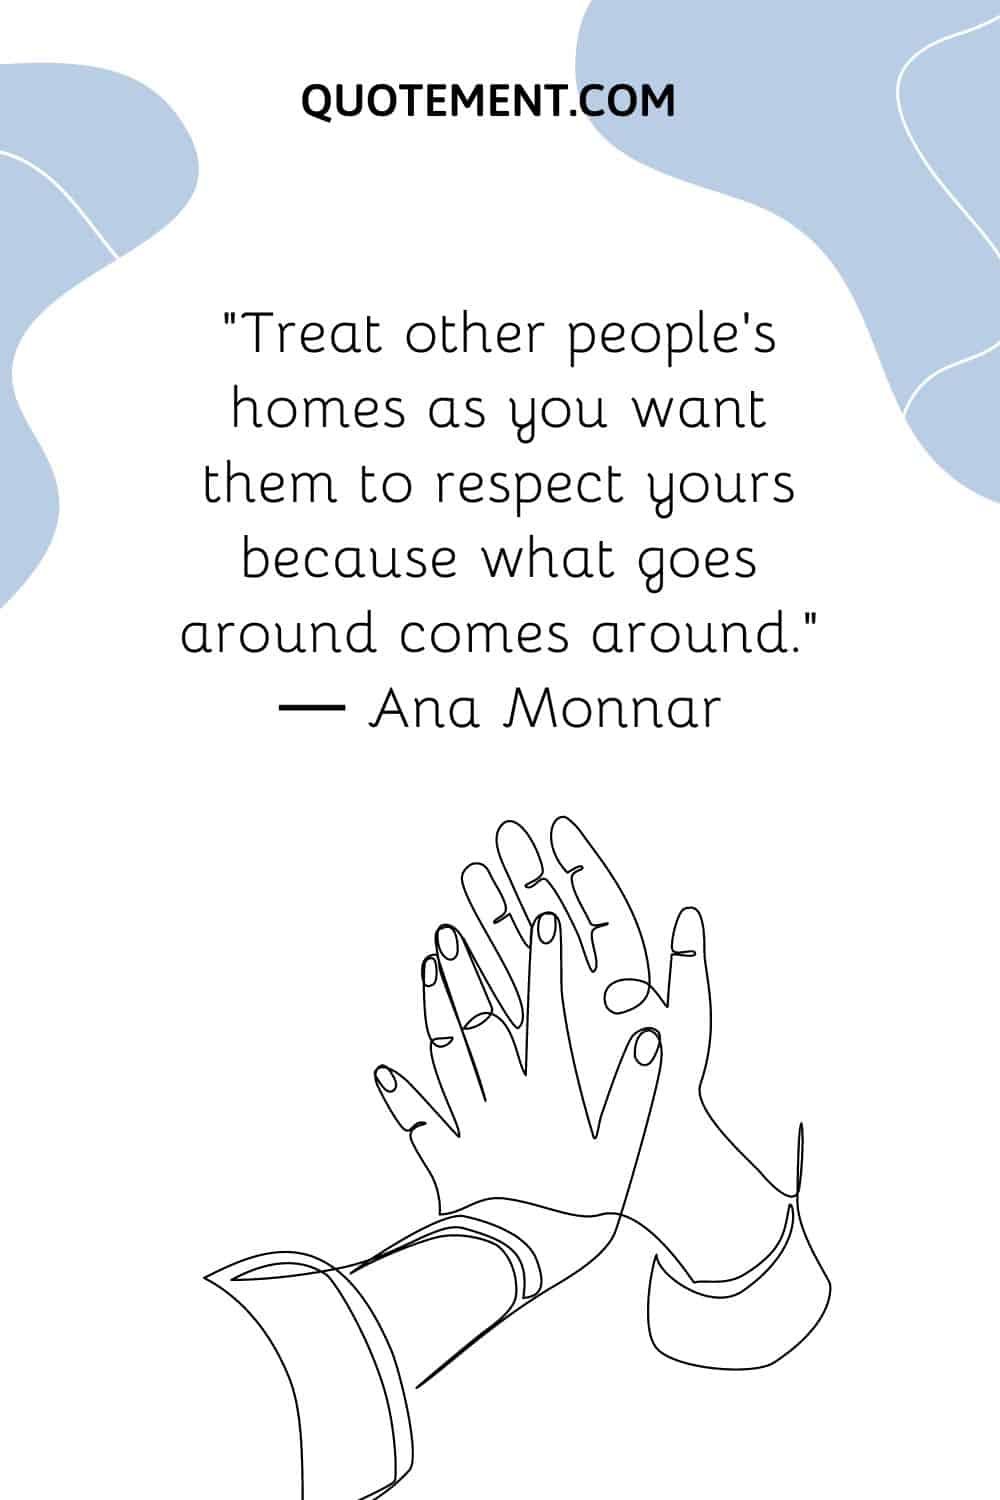 Treat other people’s homes as you want them to respect yours because what goes around comes around